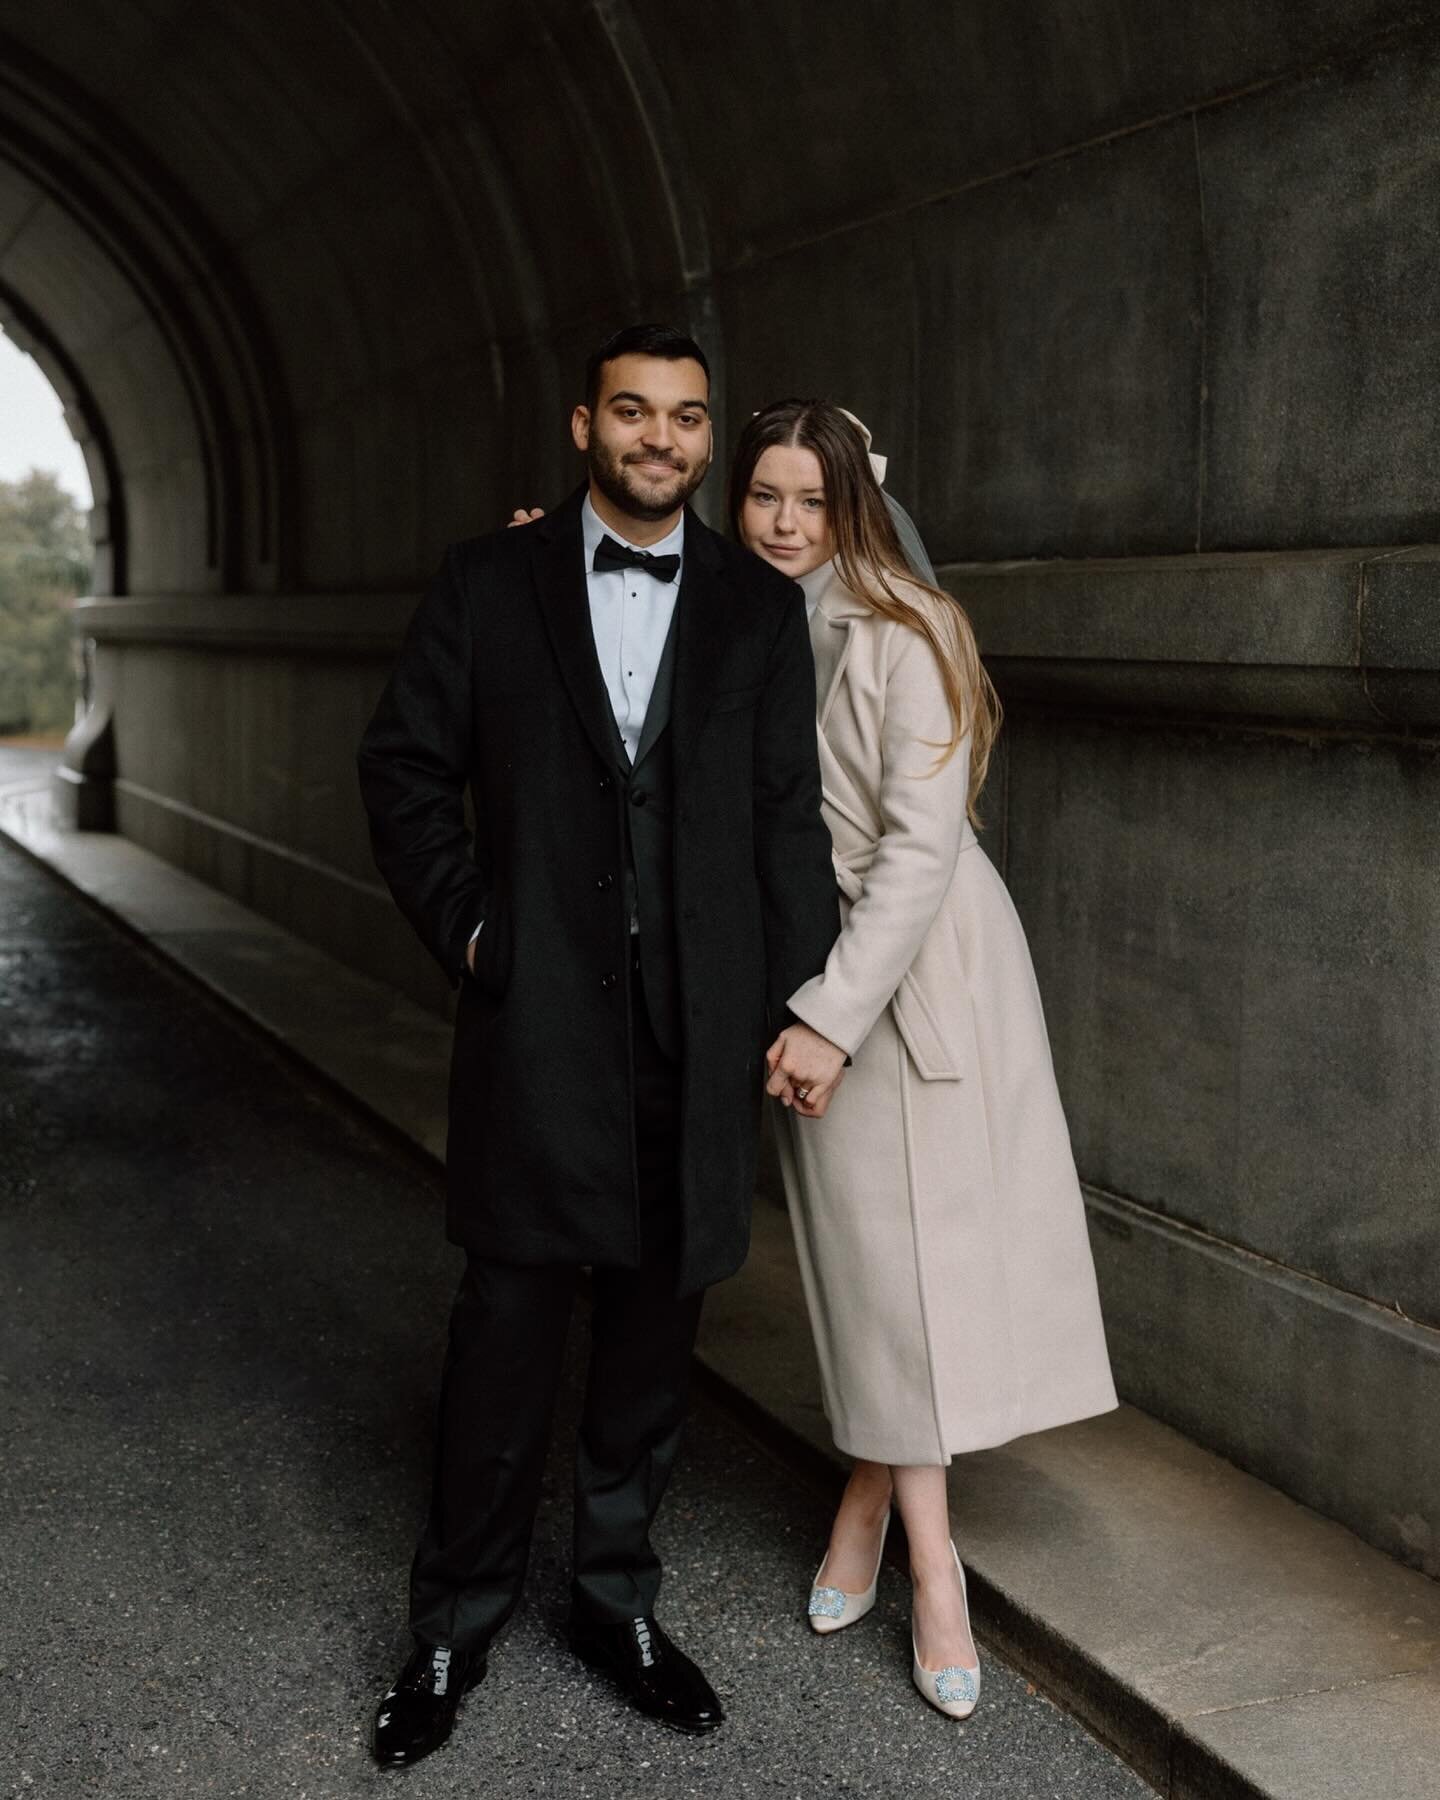 Lucy &amp; Xavier had the sweetest winter elopement at the Library of Congress 🤍 The second slide of them saying hi to her grandmother on FaceTime in the UK gets me every time 😭